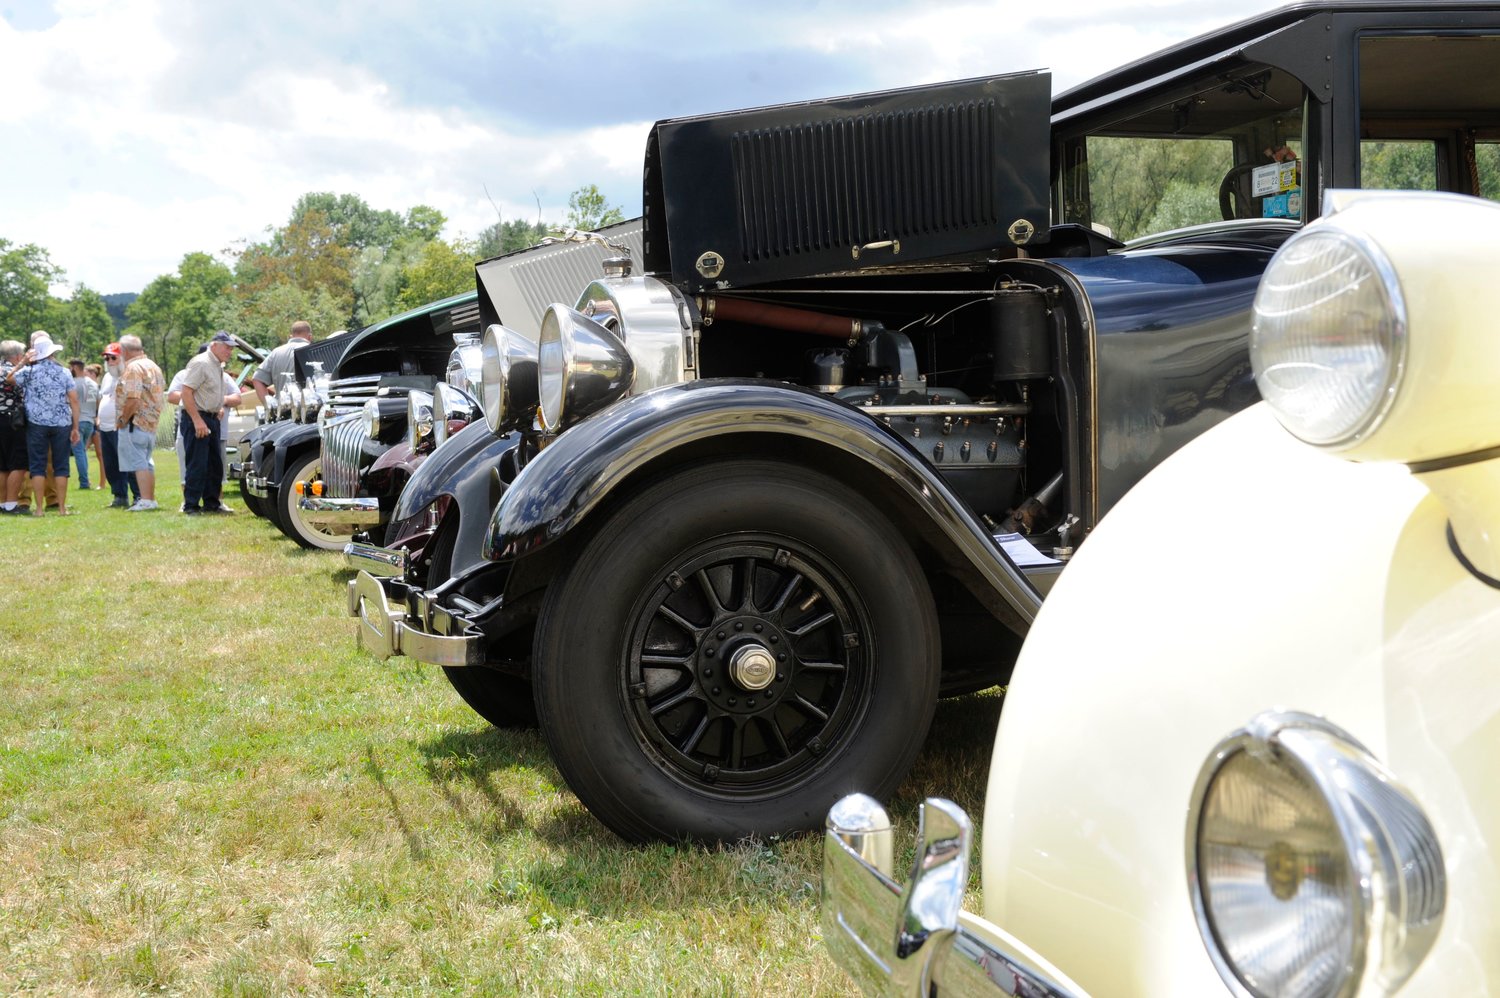 A lineup of classics. Allan and Pat Kehrley showcased several of their immaculately restored and preserved classic cars. Their 1932 Buick Sedan took first place in the antique car pre-1939 class, while their stunning 1935 Packard four-door convertible sedan was selected as the people’s choice.